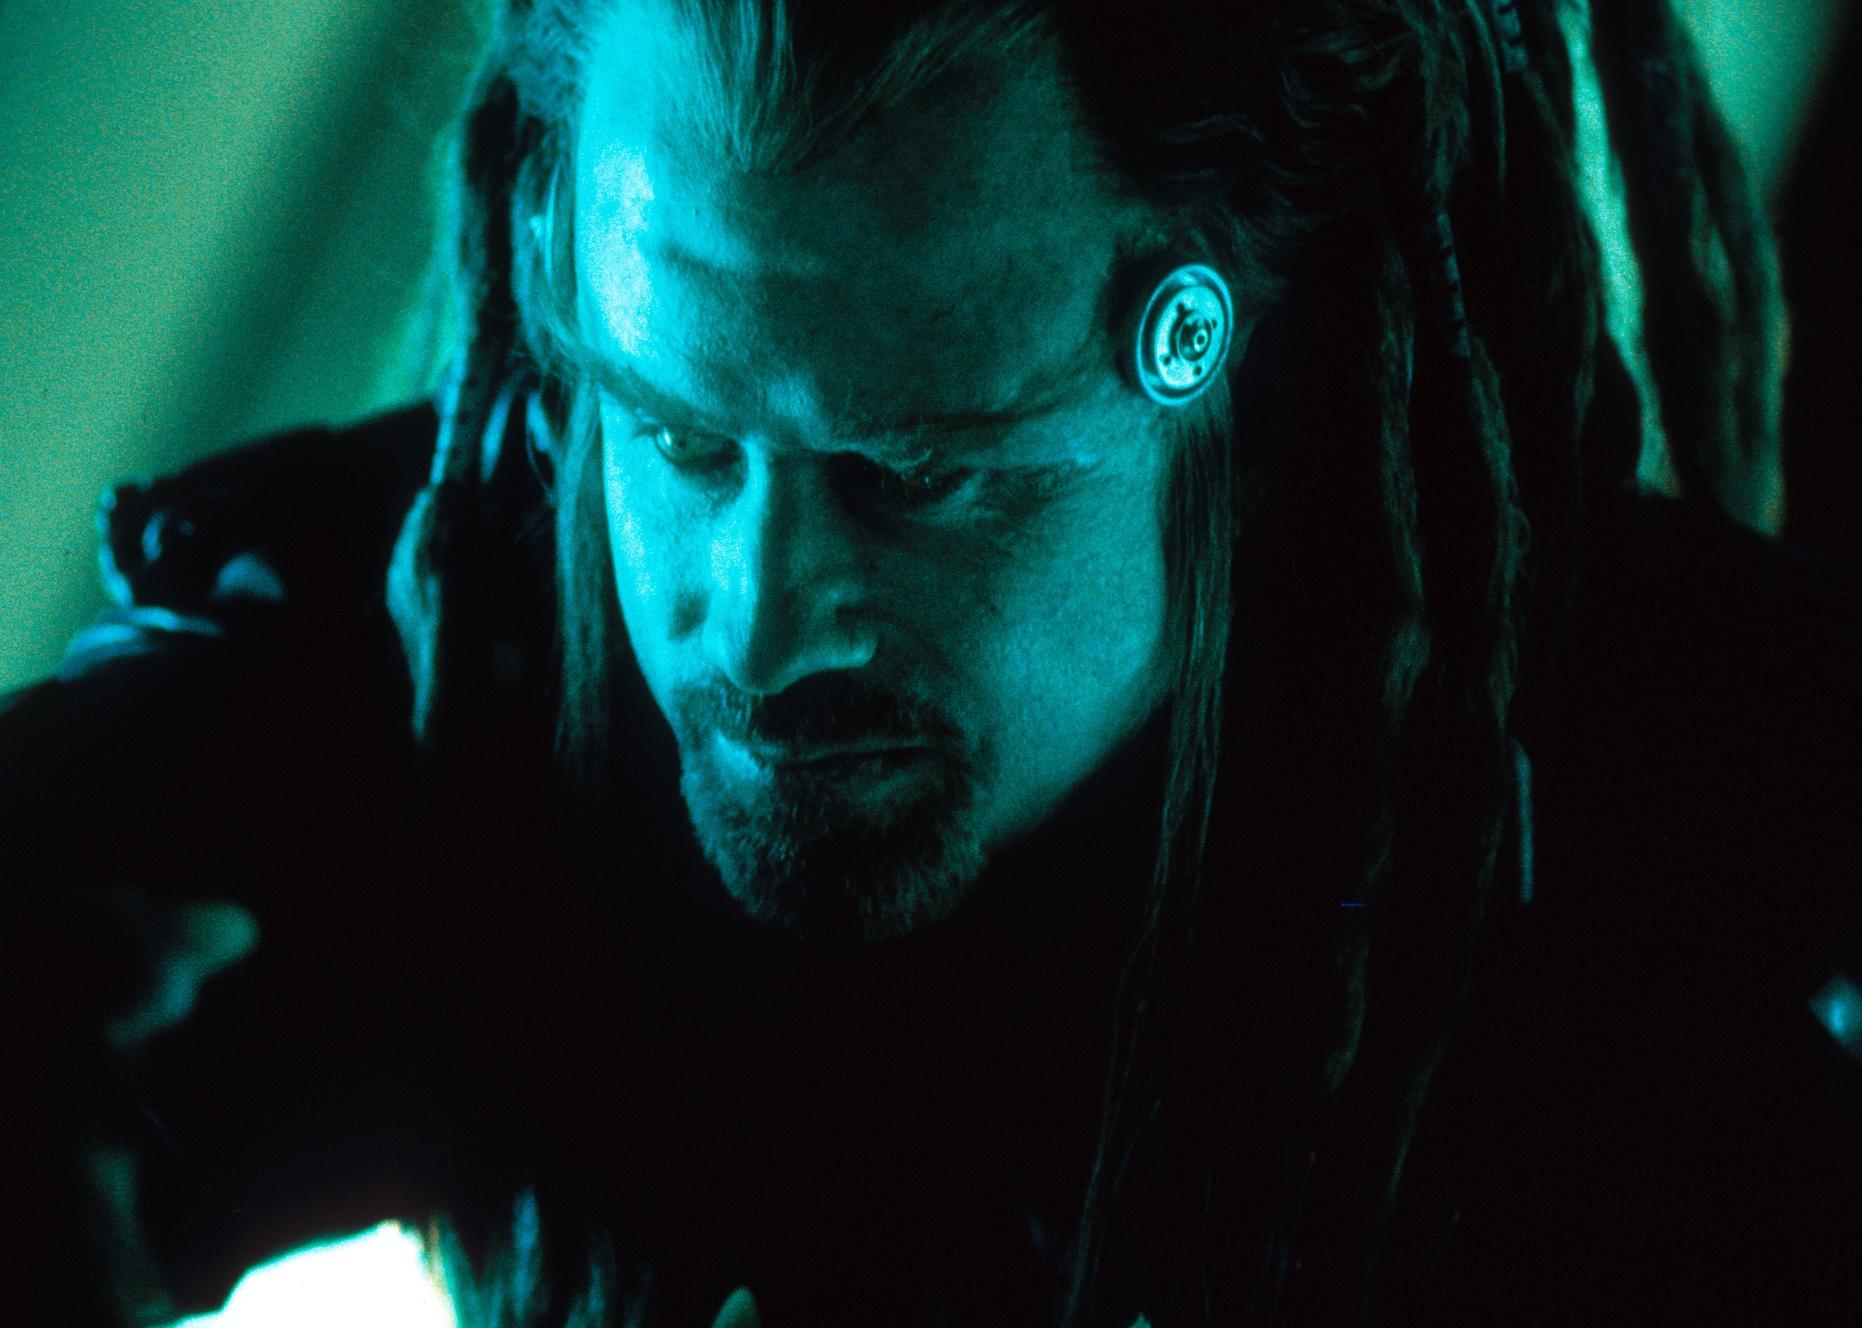 John Travolta in a green light with dreadlocks and a metal piece attached to his temple.